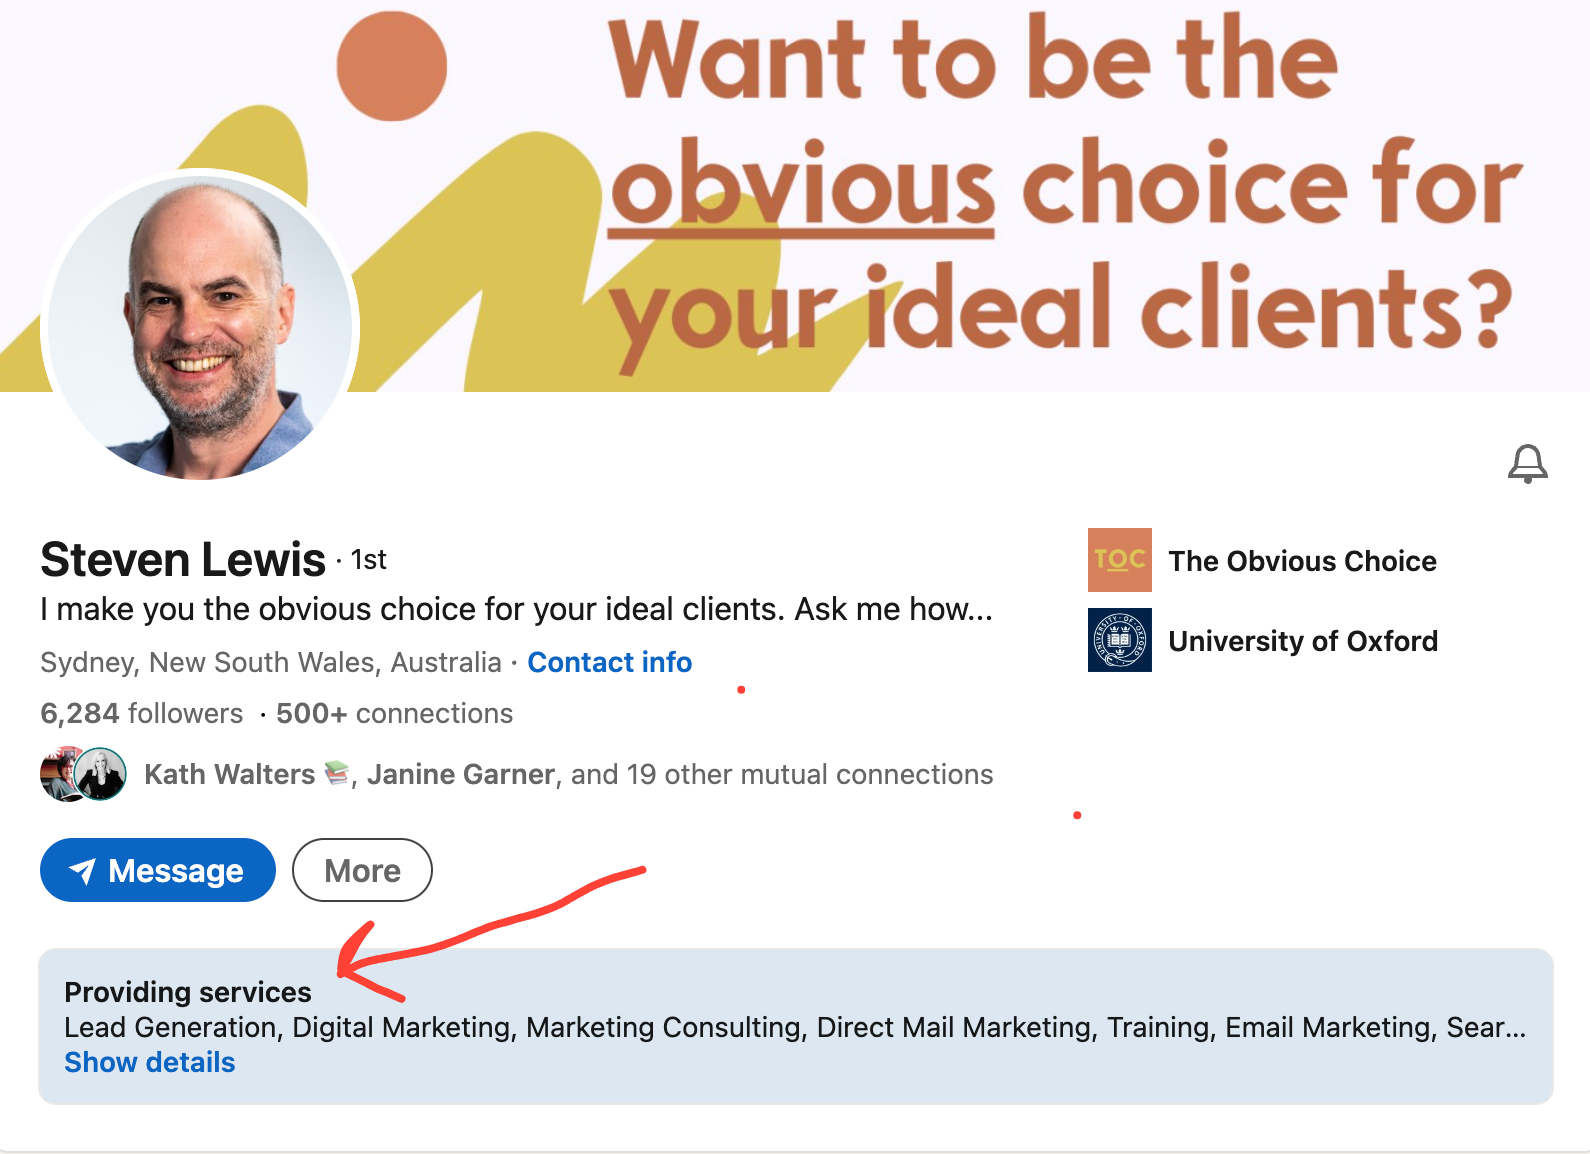 Image provides an example of what expert AI copywriter Steven Lewis's Services section looks like